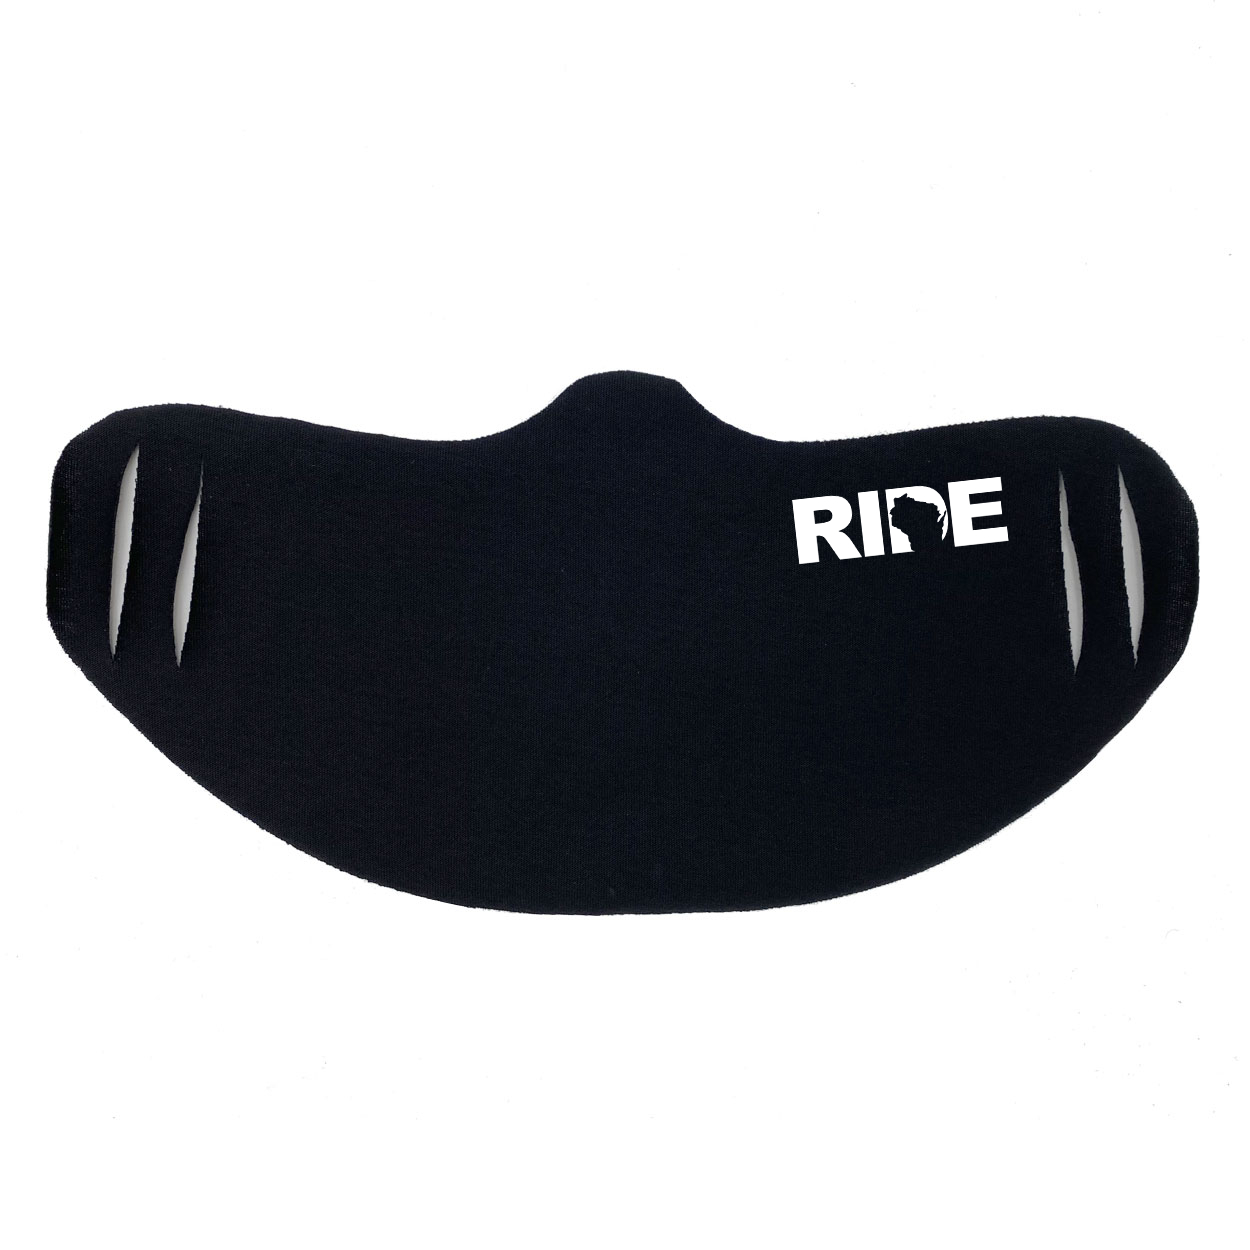 Ride Wisconsin Ultra Lightweight Face Mask Cover Black (White Logo)